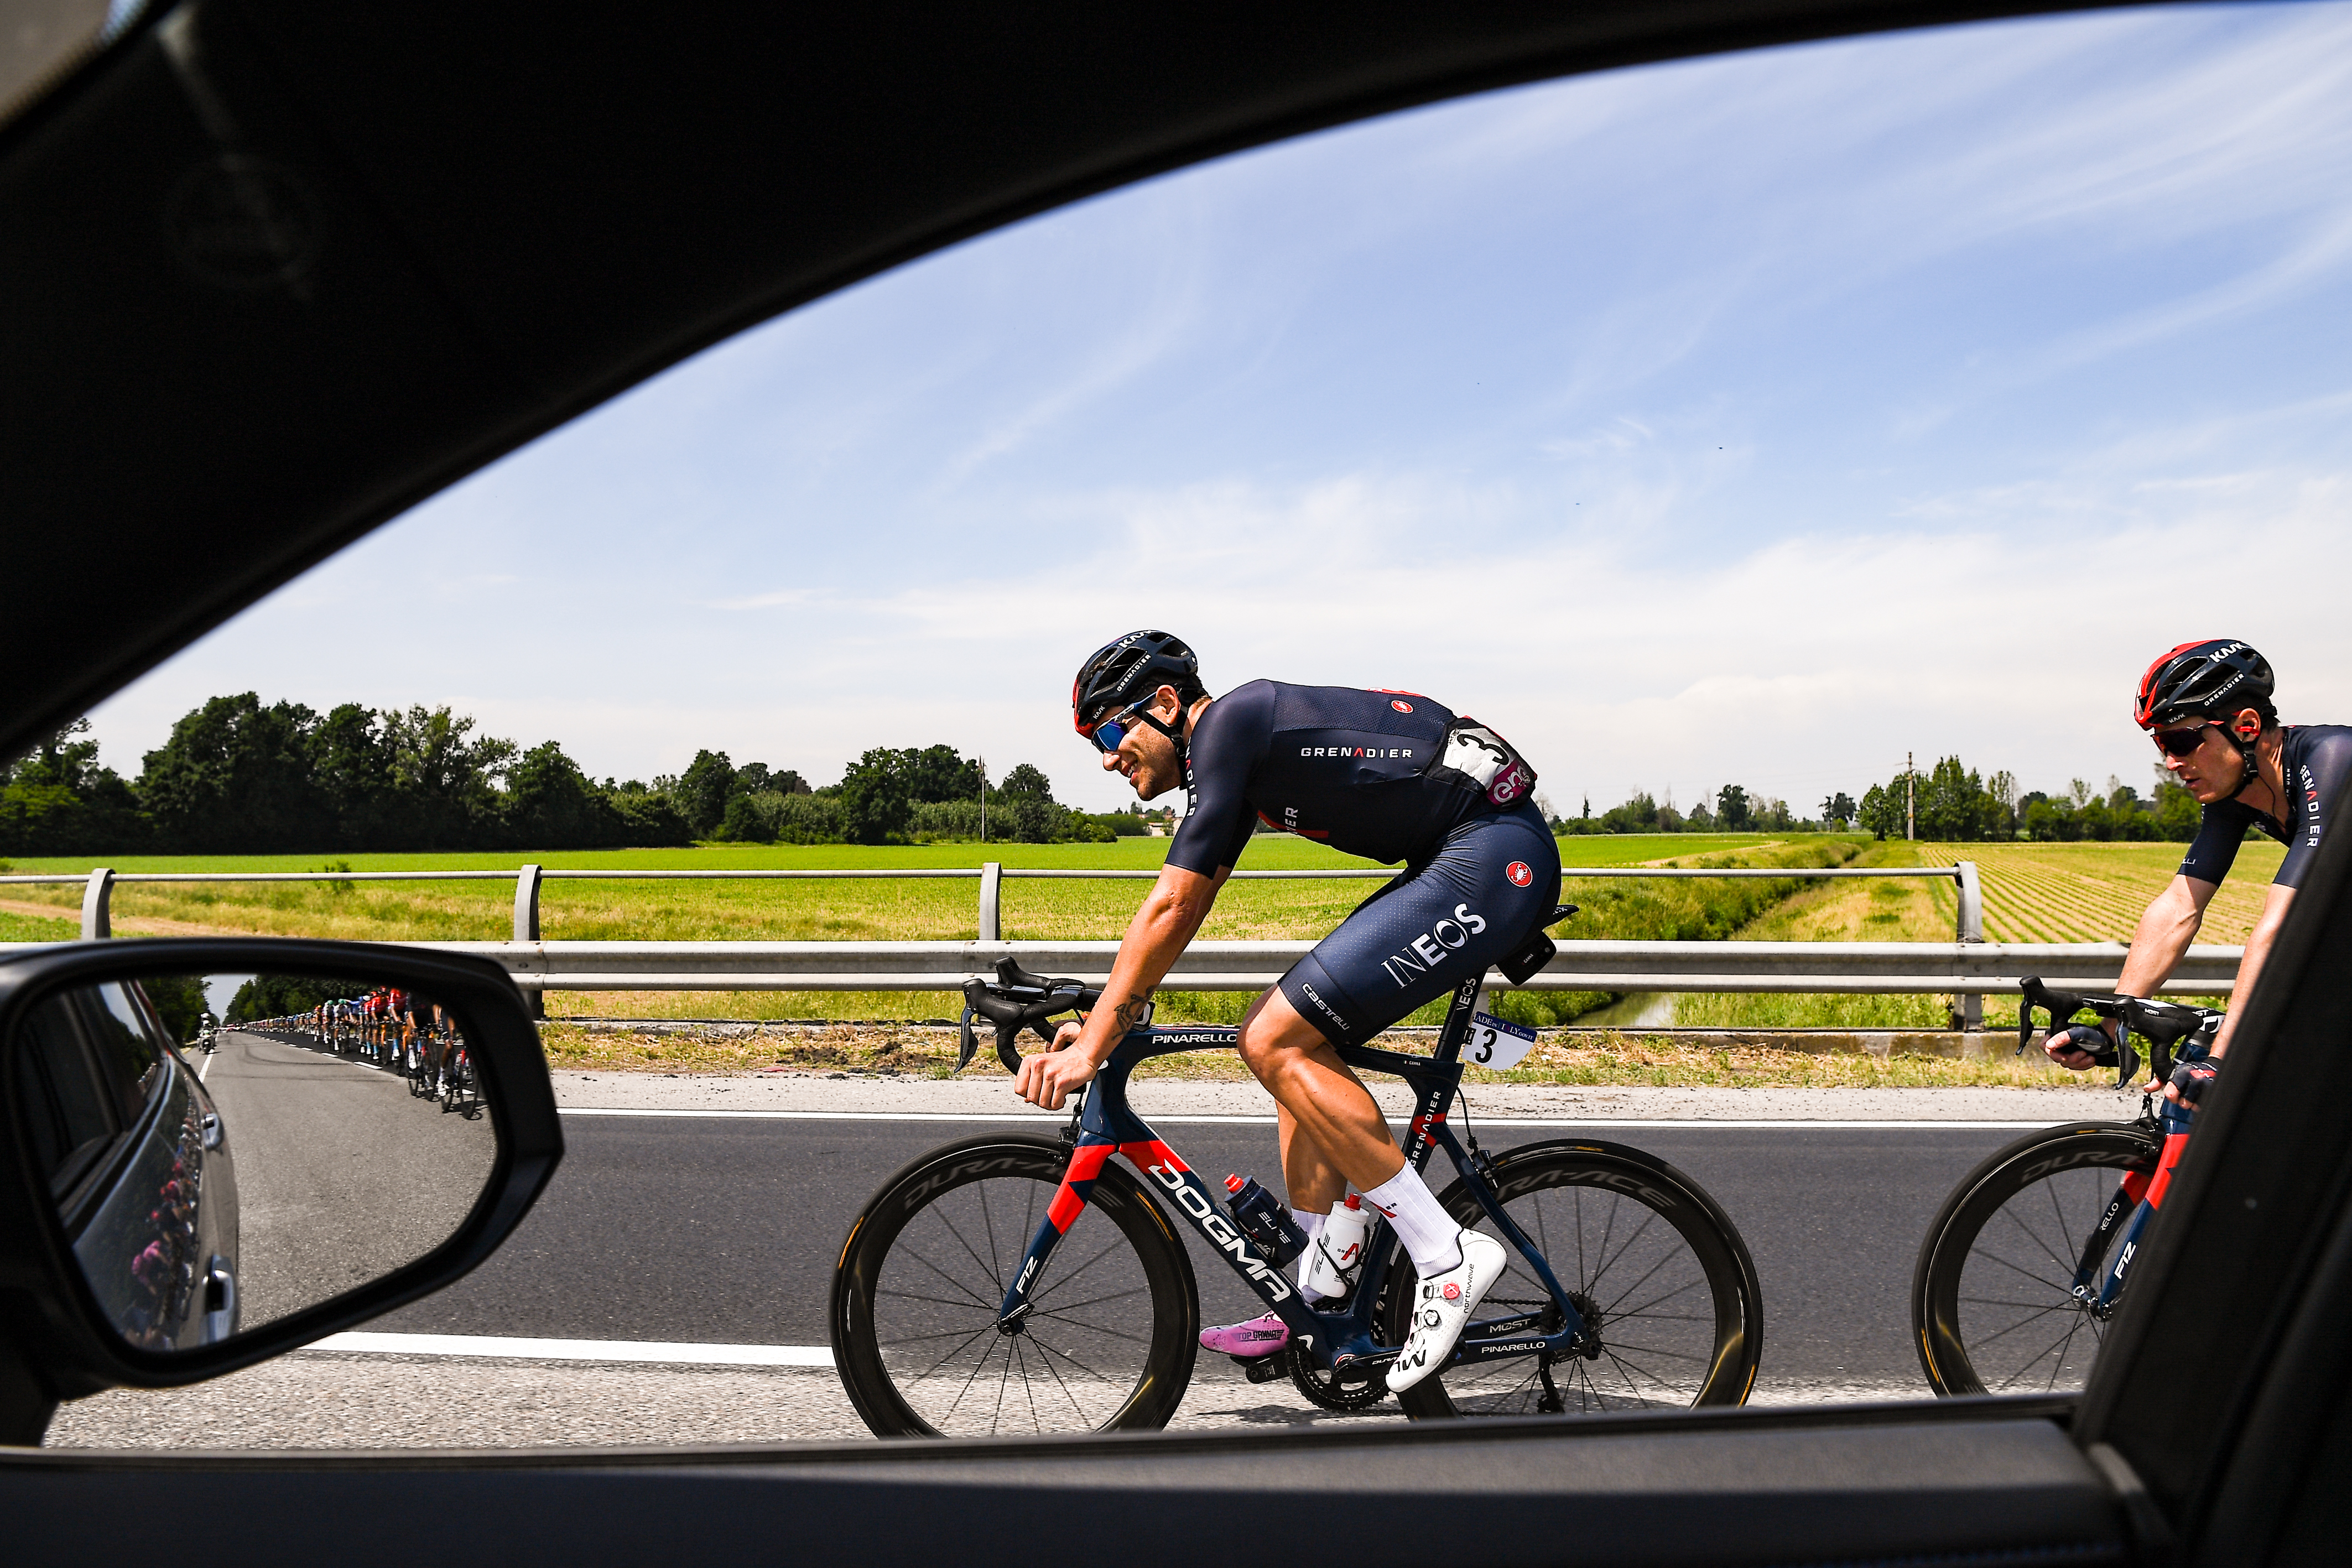 An Ineos Grenadier cyclist photographed from an in-car hospitality vehicle